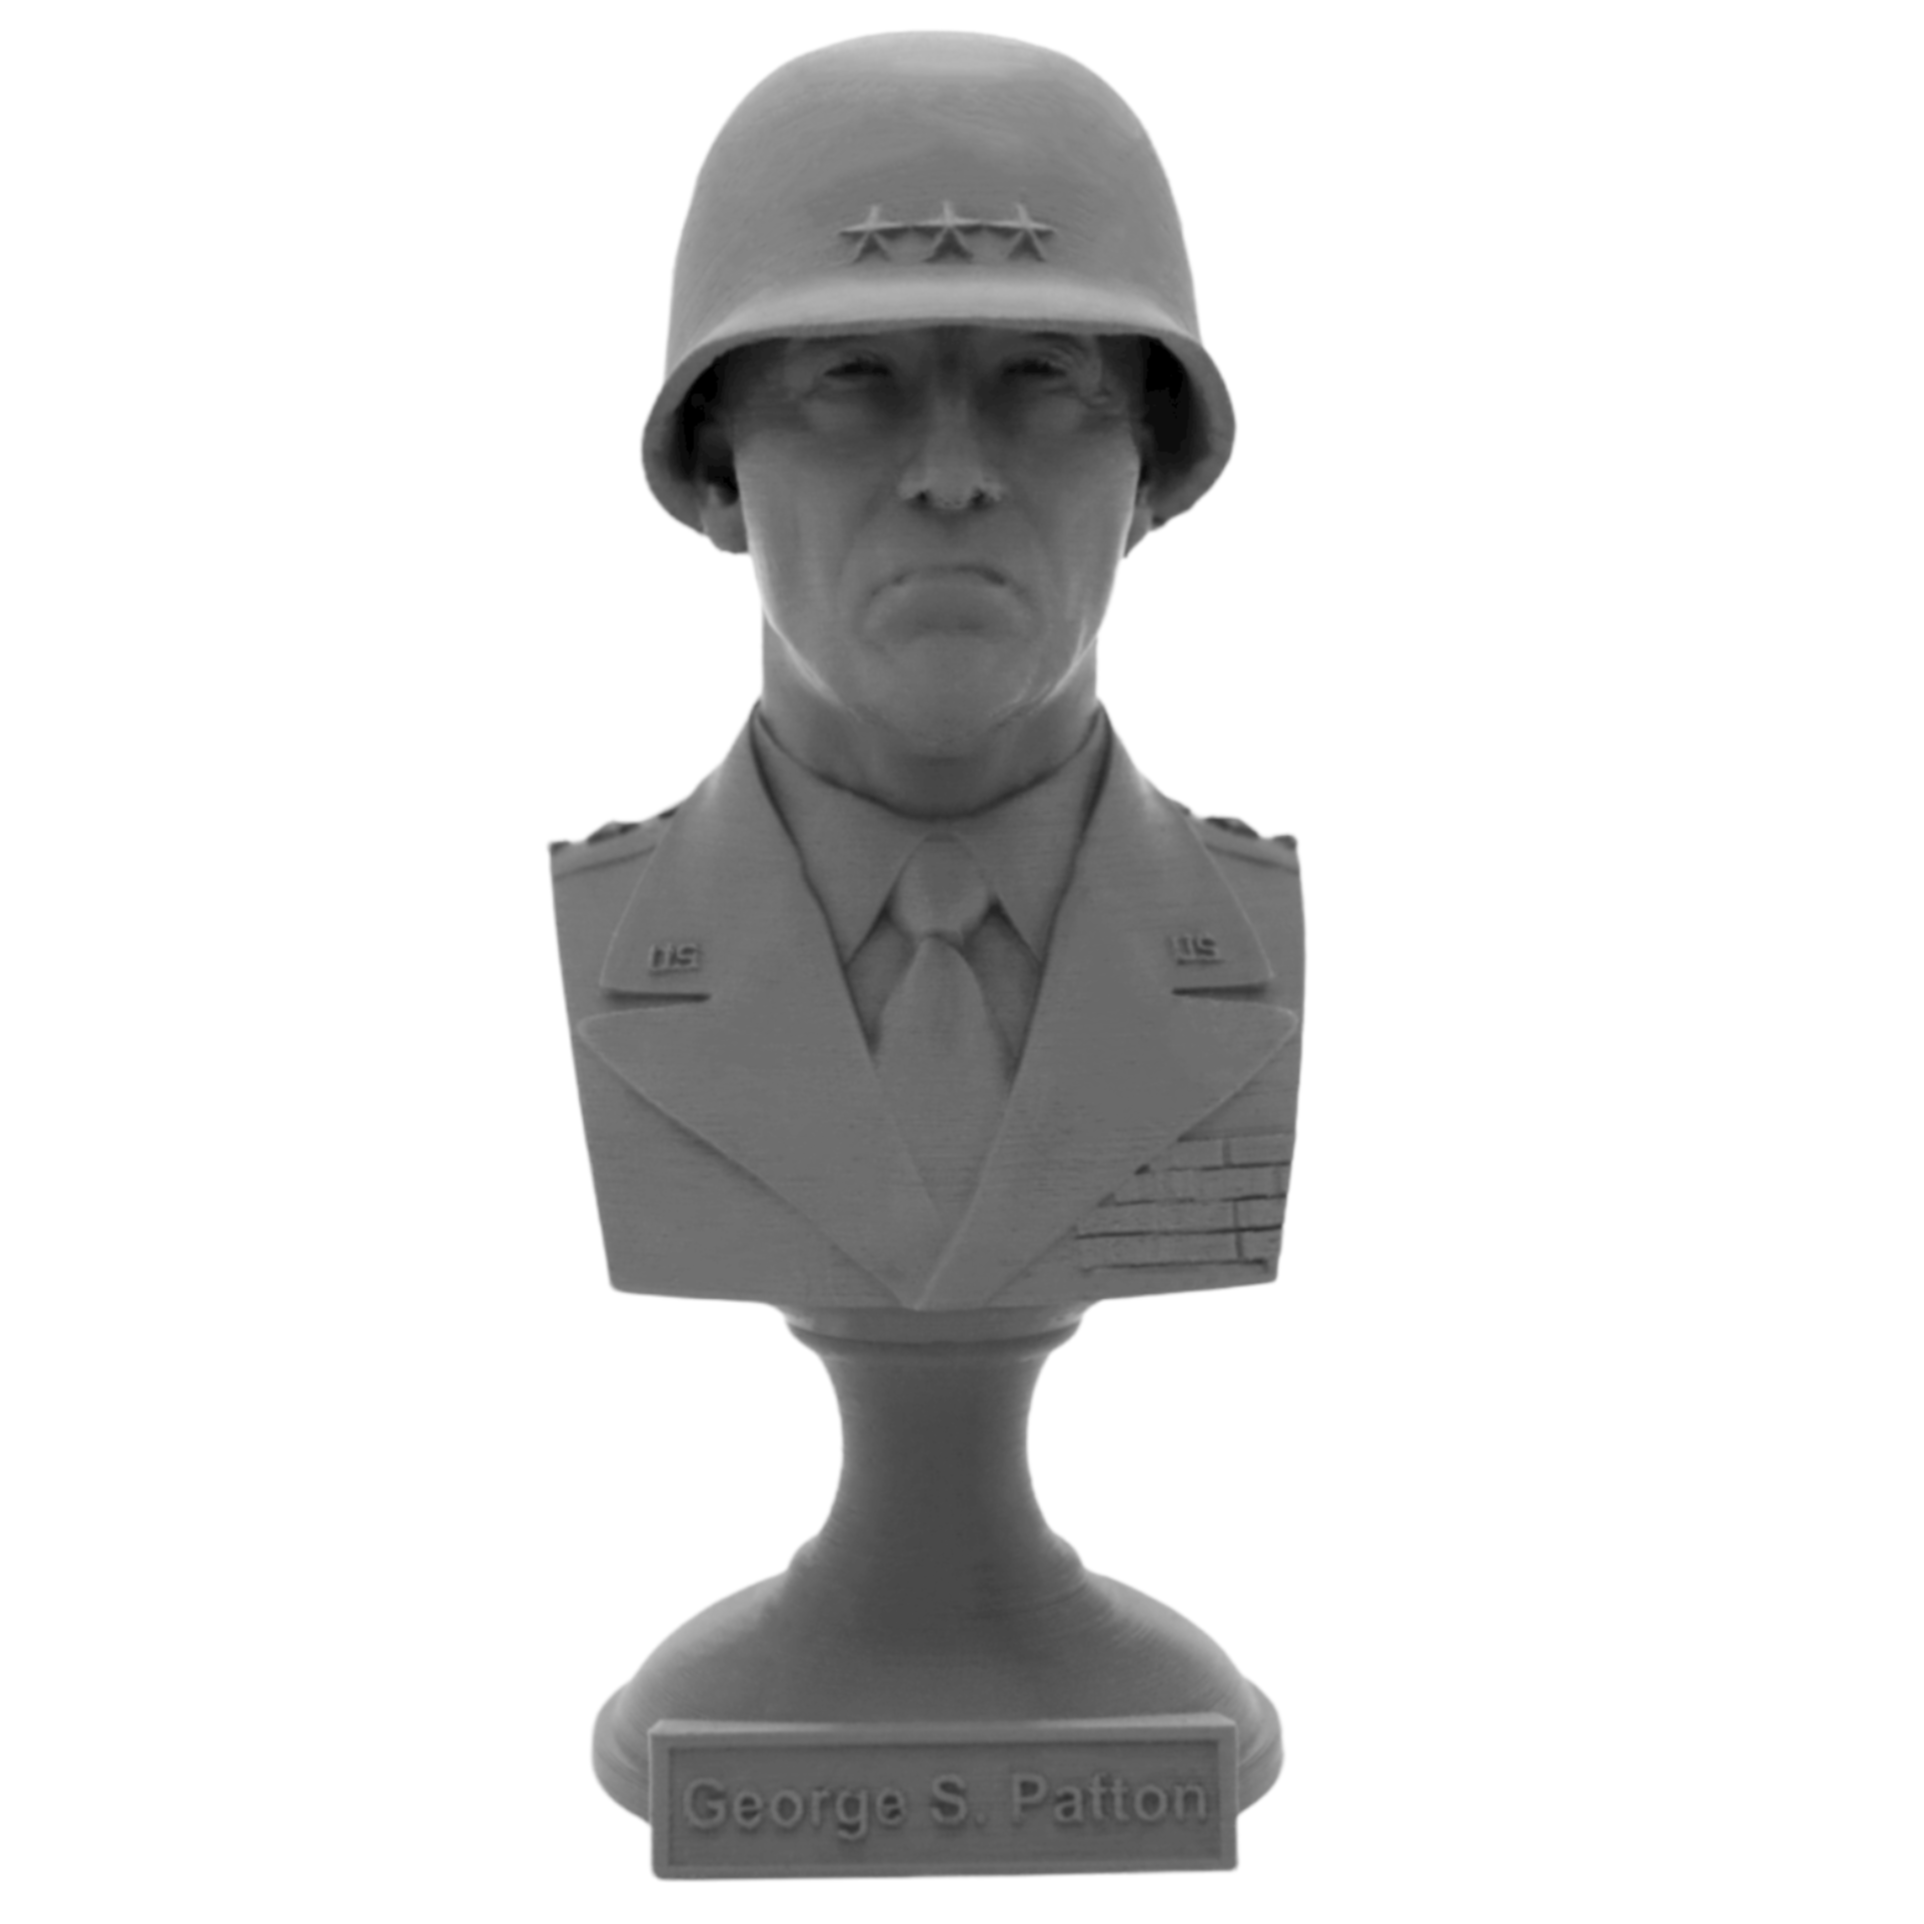 George S Patton Legendary US Army General Sculpture Bust on Pedestal